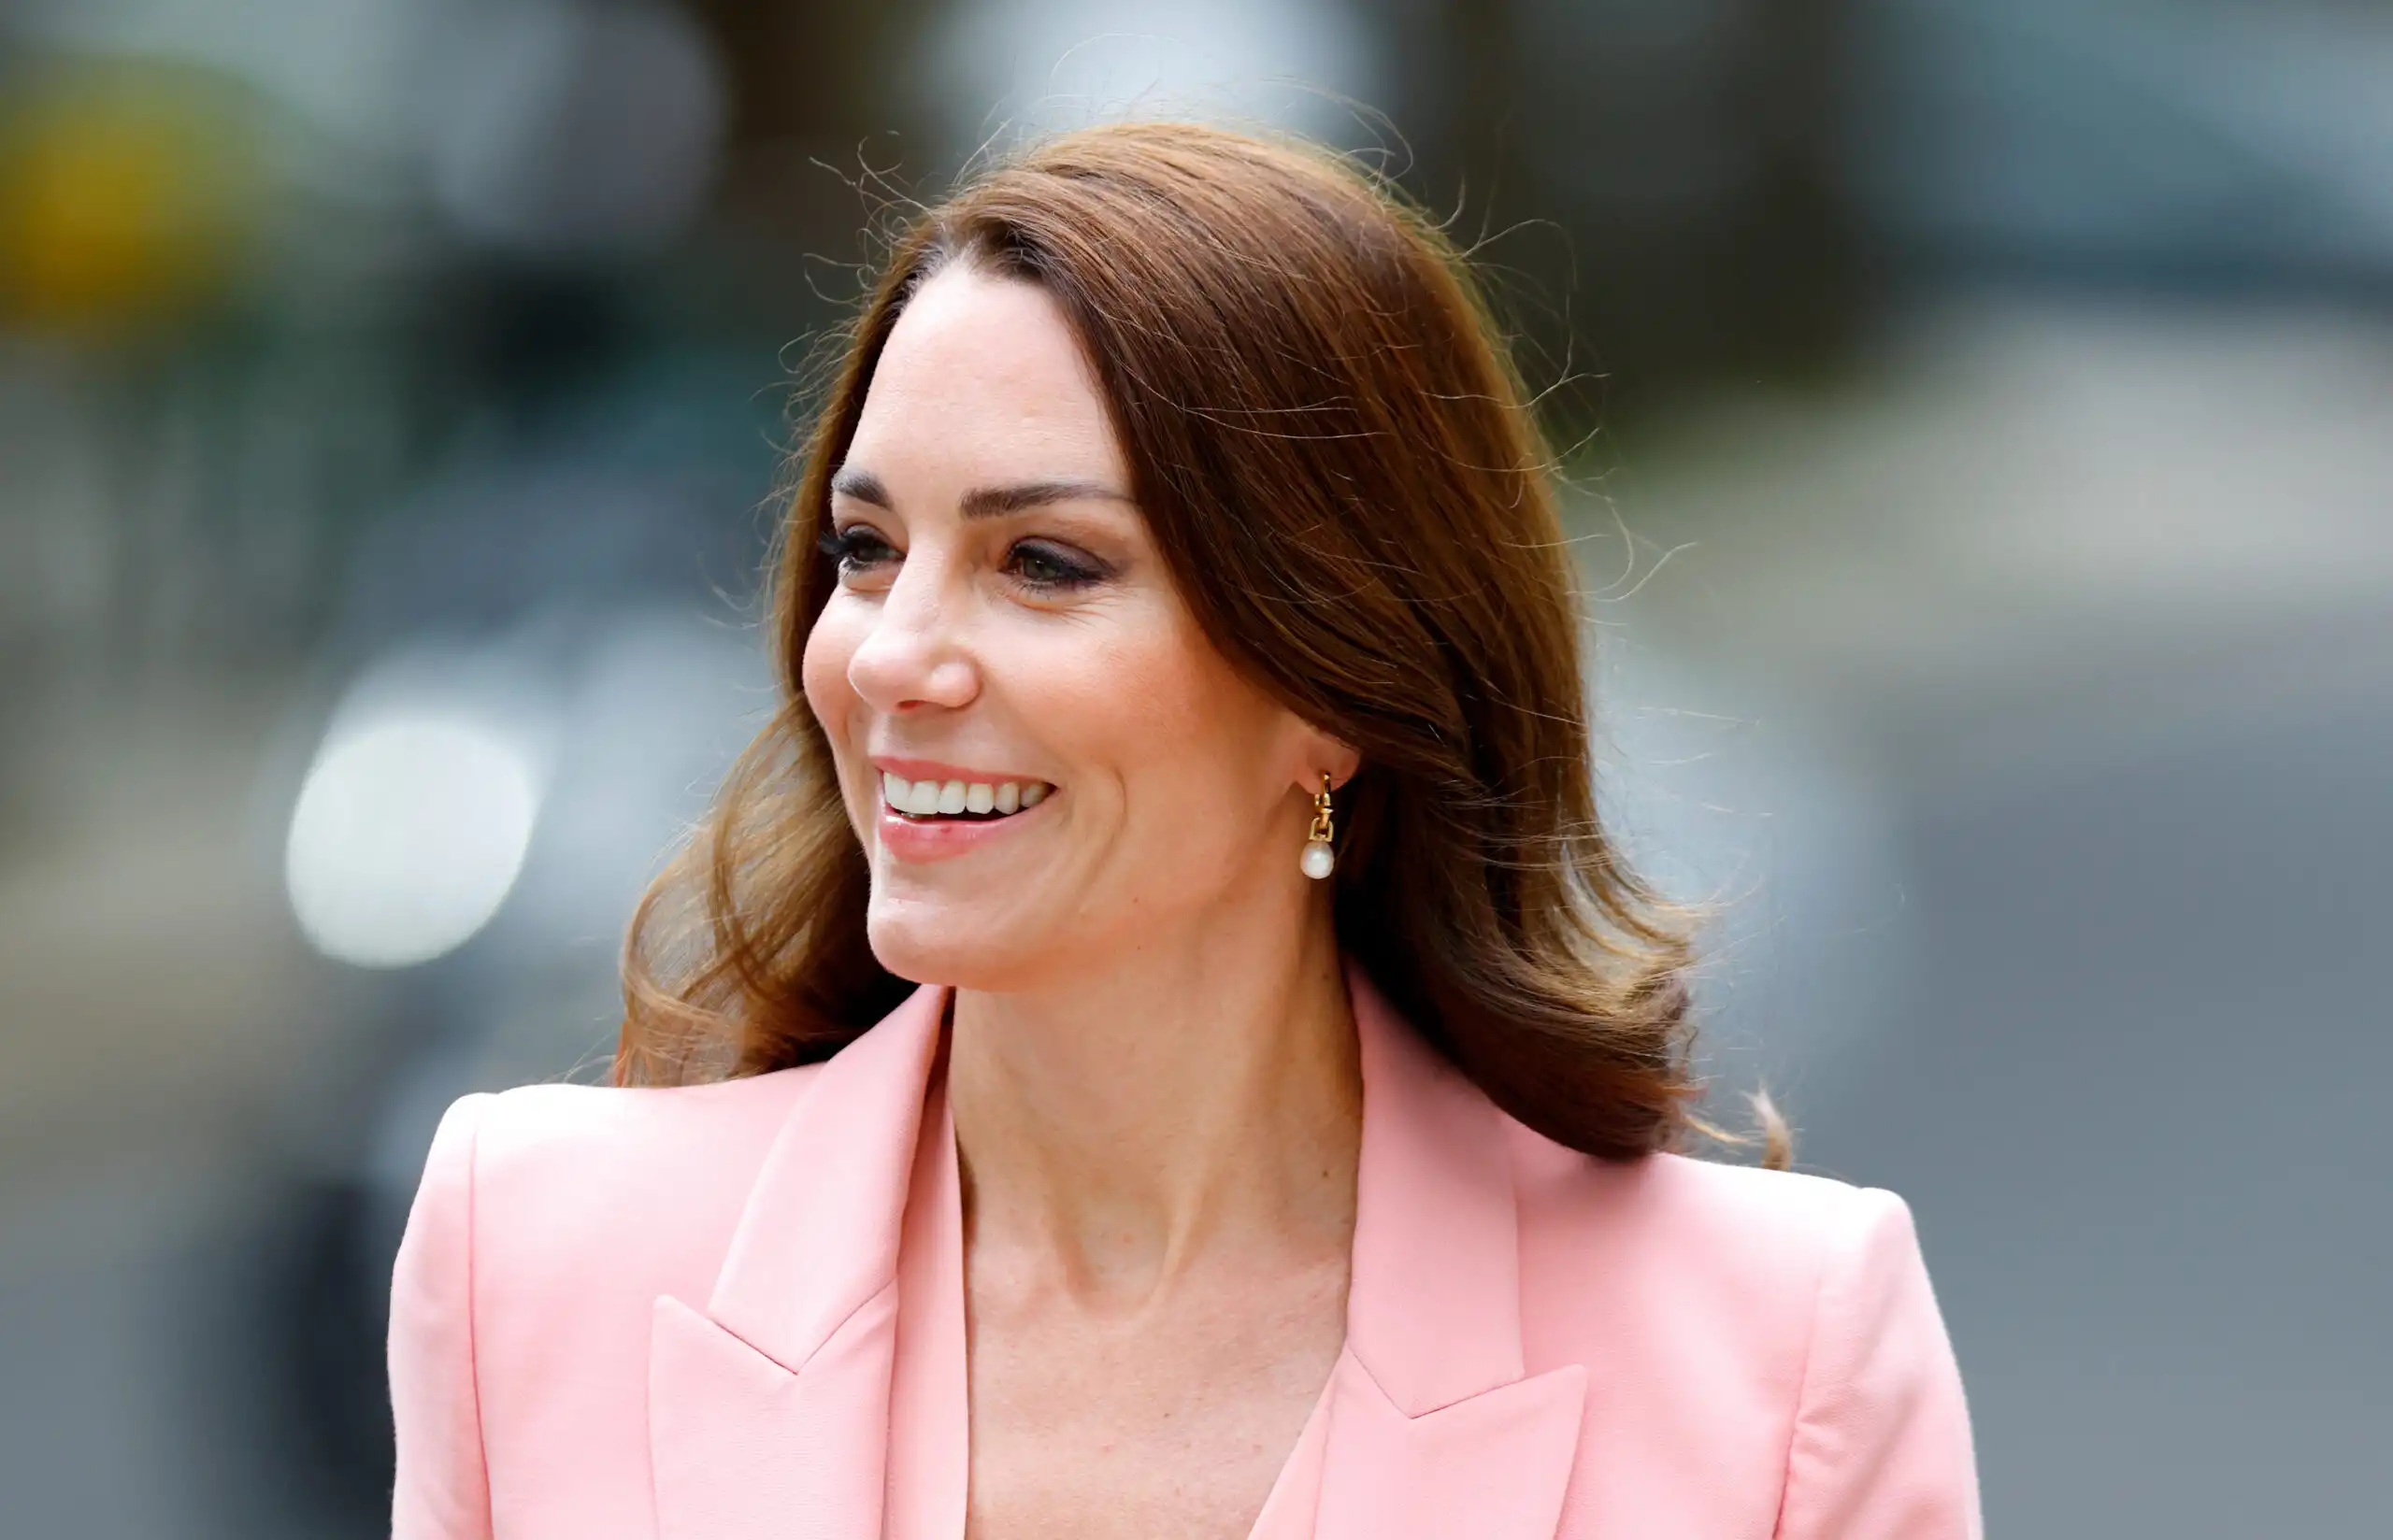 Palace Update: Kate Middleton Returning to Royal Duties - Conservative Angle